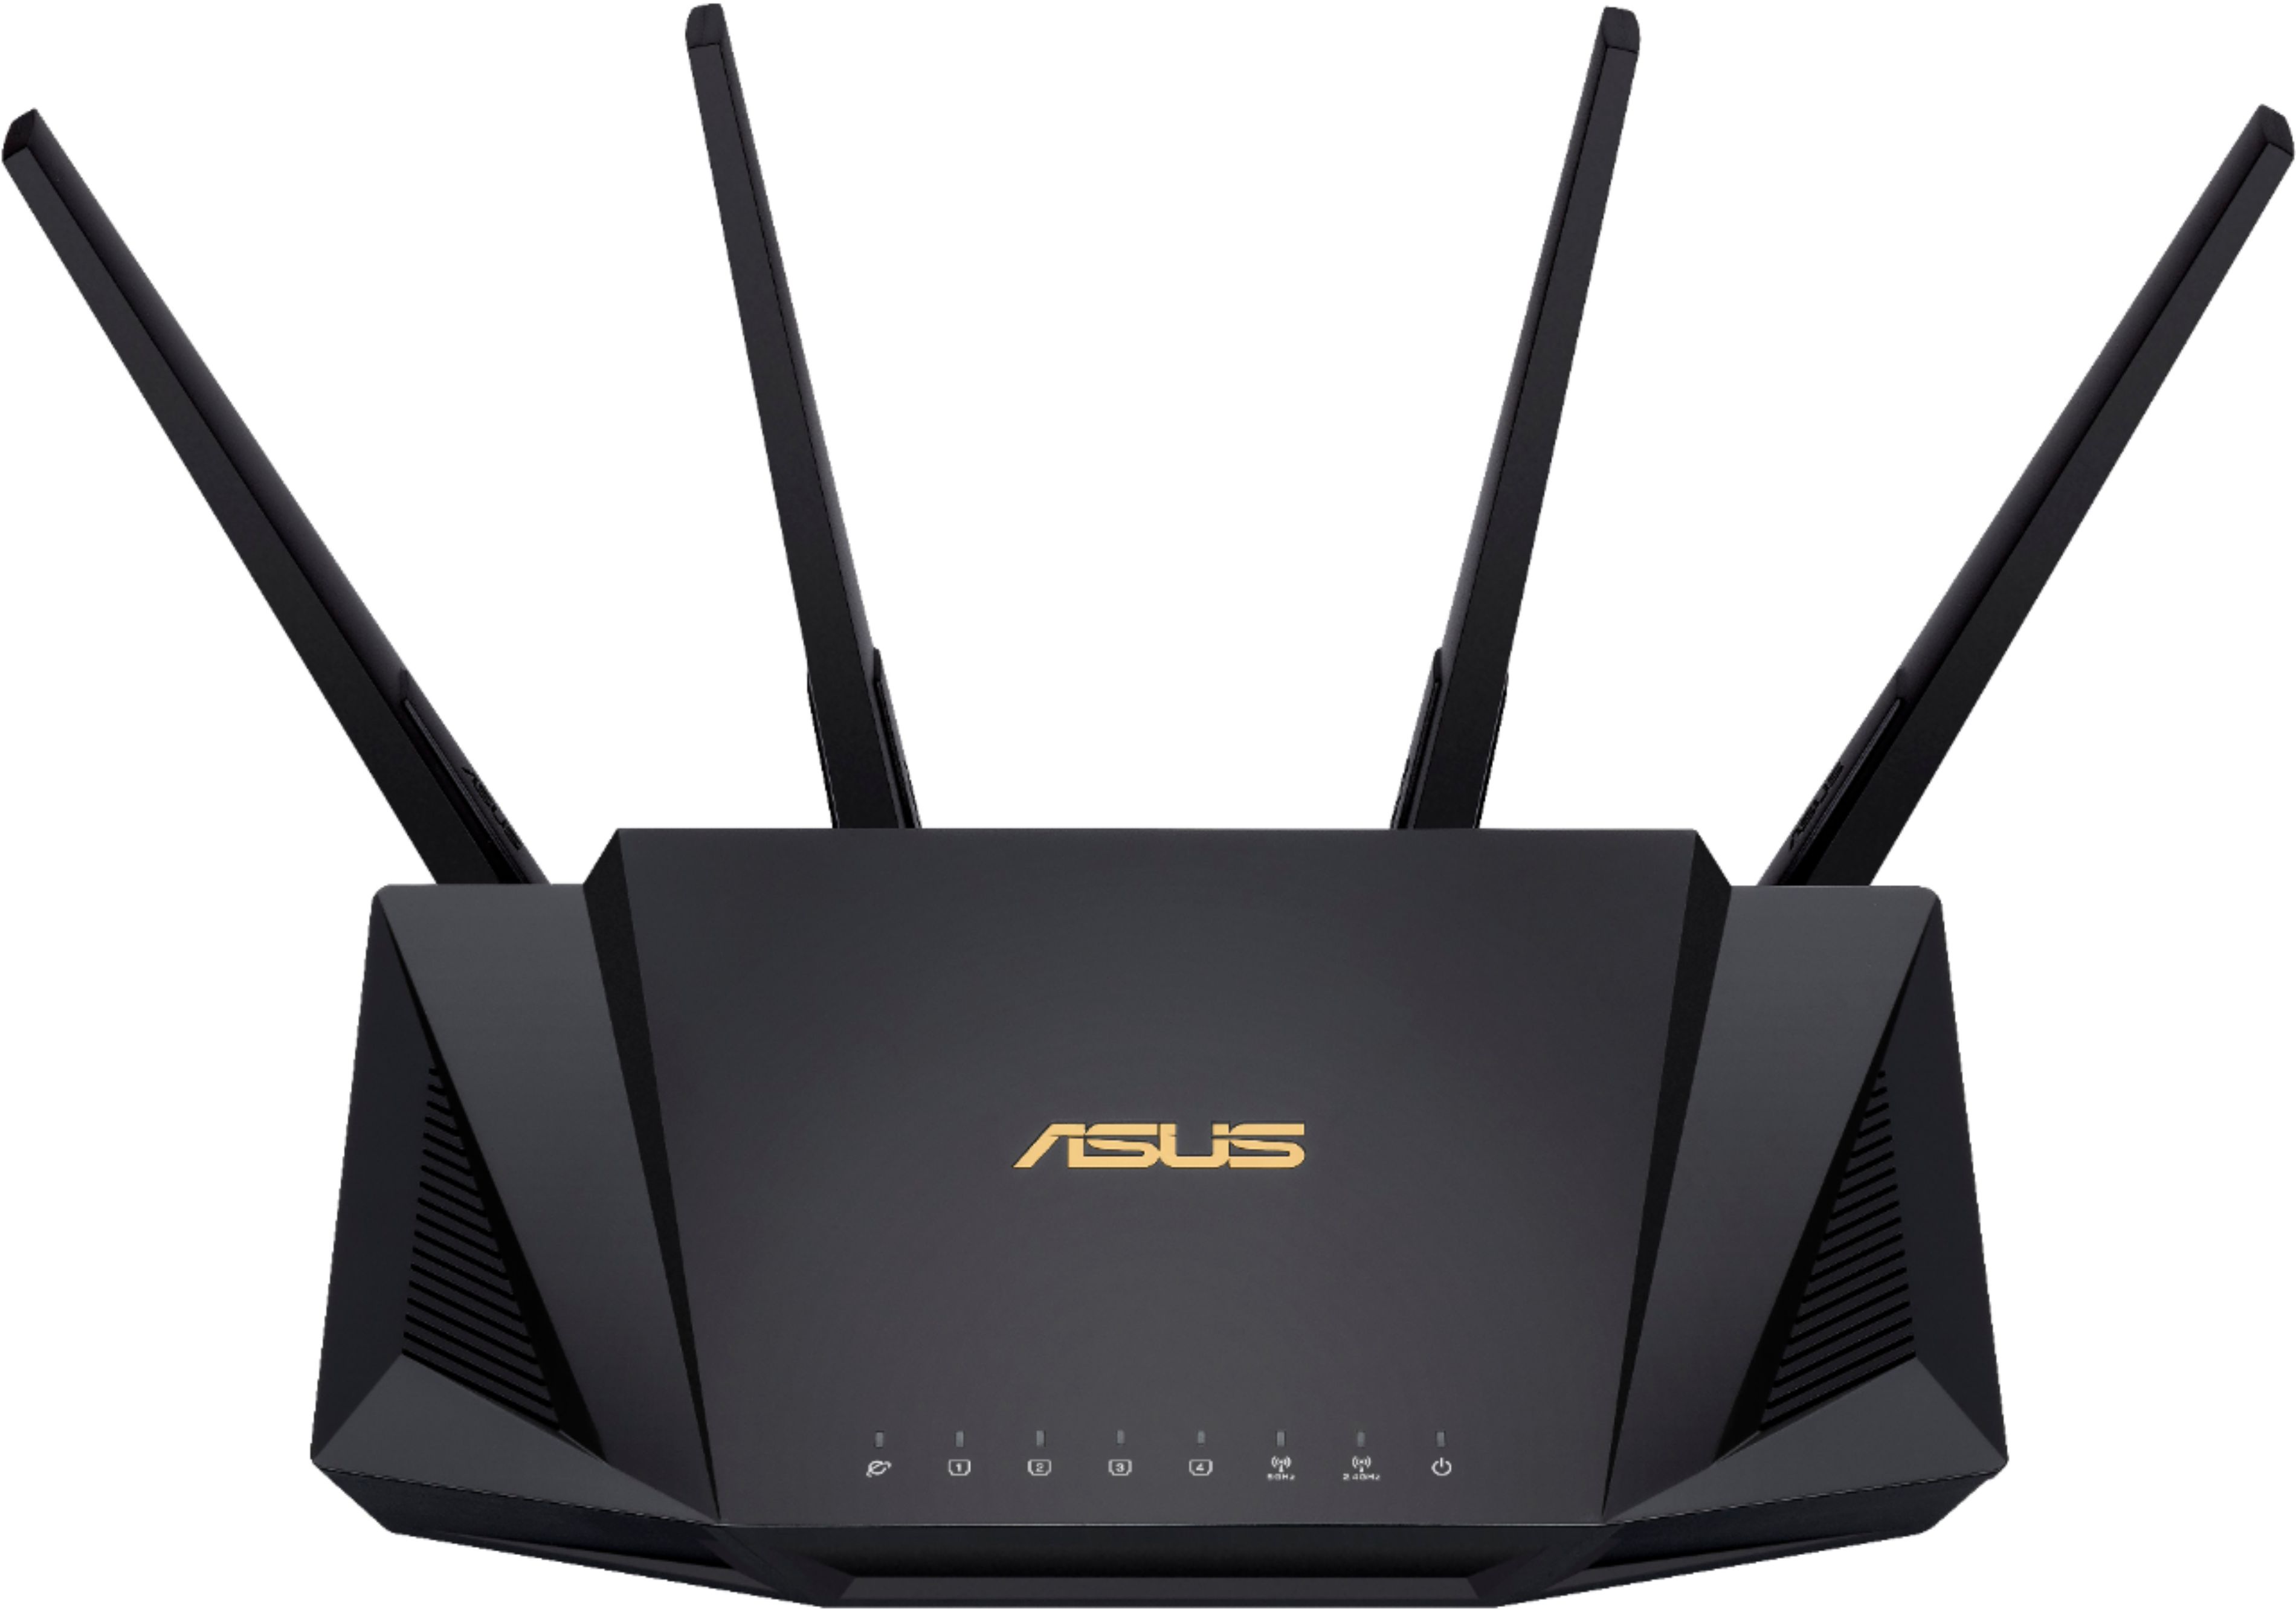 Reskyd Fancy kjole klokke ASUS AX3000 Dual-Band WiFi 6 Wireless Router with Life time internet  Security Black RT-AX58U - Best Buy